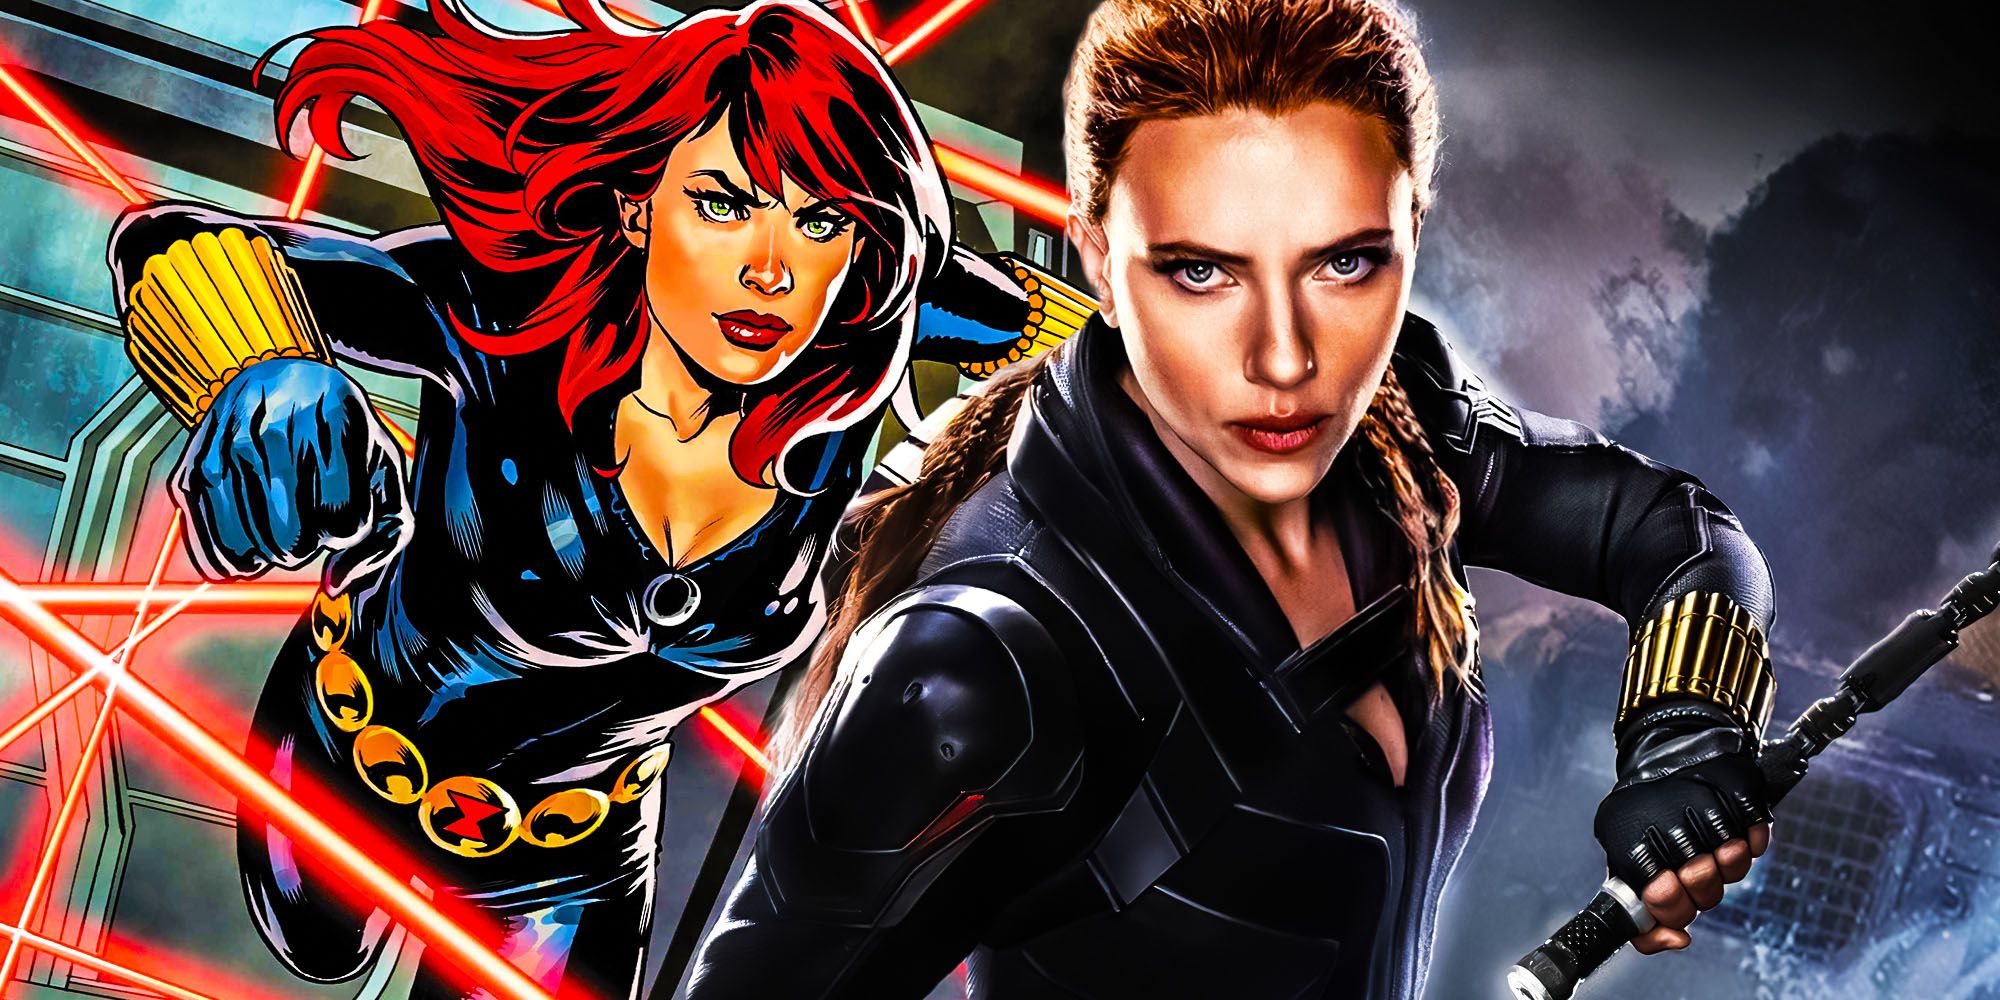 Black widow movie costume has nod to comic book roots yellow gauntlets